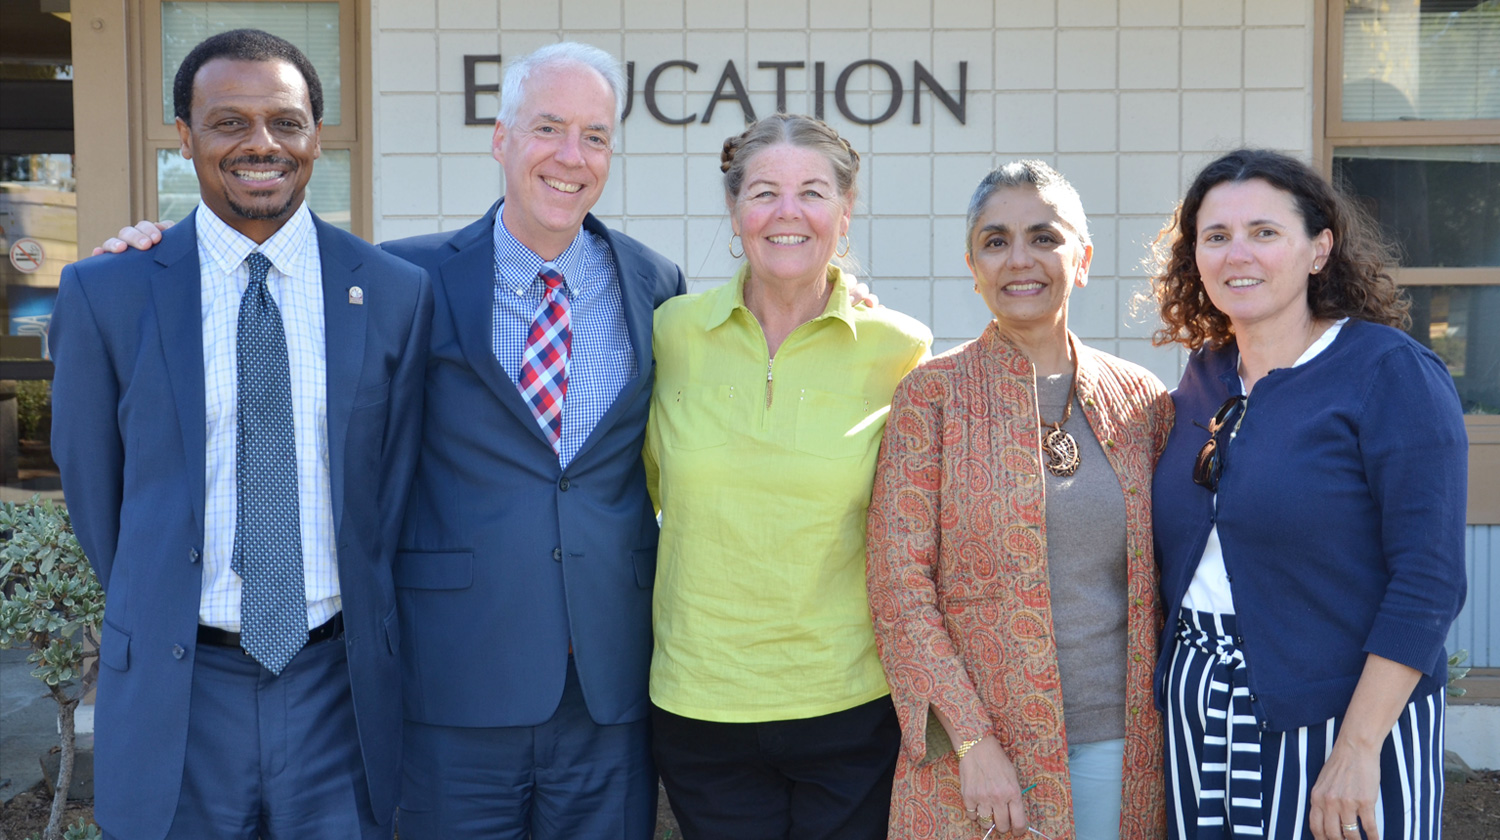 (Left to Right): John Davis, dean of the College of Education; Ken O'Donnell, vice provost; Pamela Robinson, graduate education lecturer; Kirti Sawhney Celly, professor of marketing and co-chair of the College of Busines, Administration and Public Policy; and Begona De Velasco, adjunct biology professor.